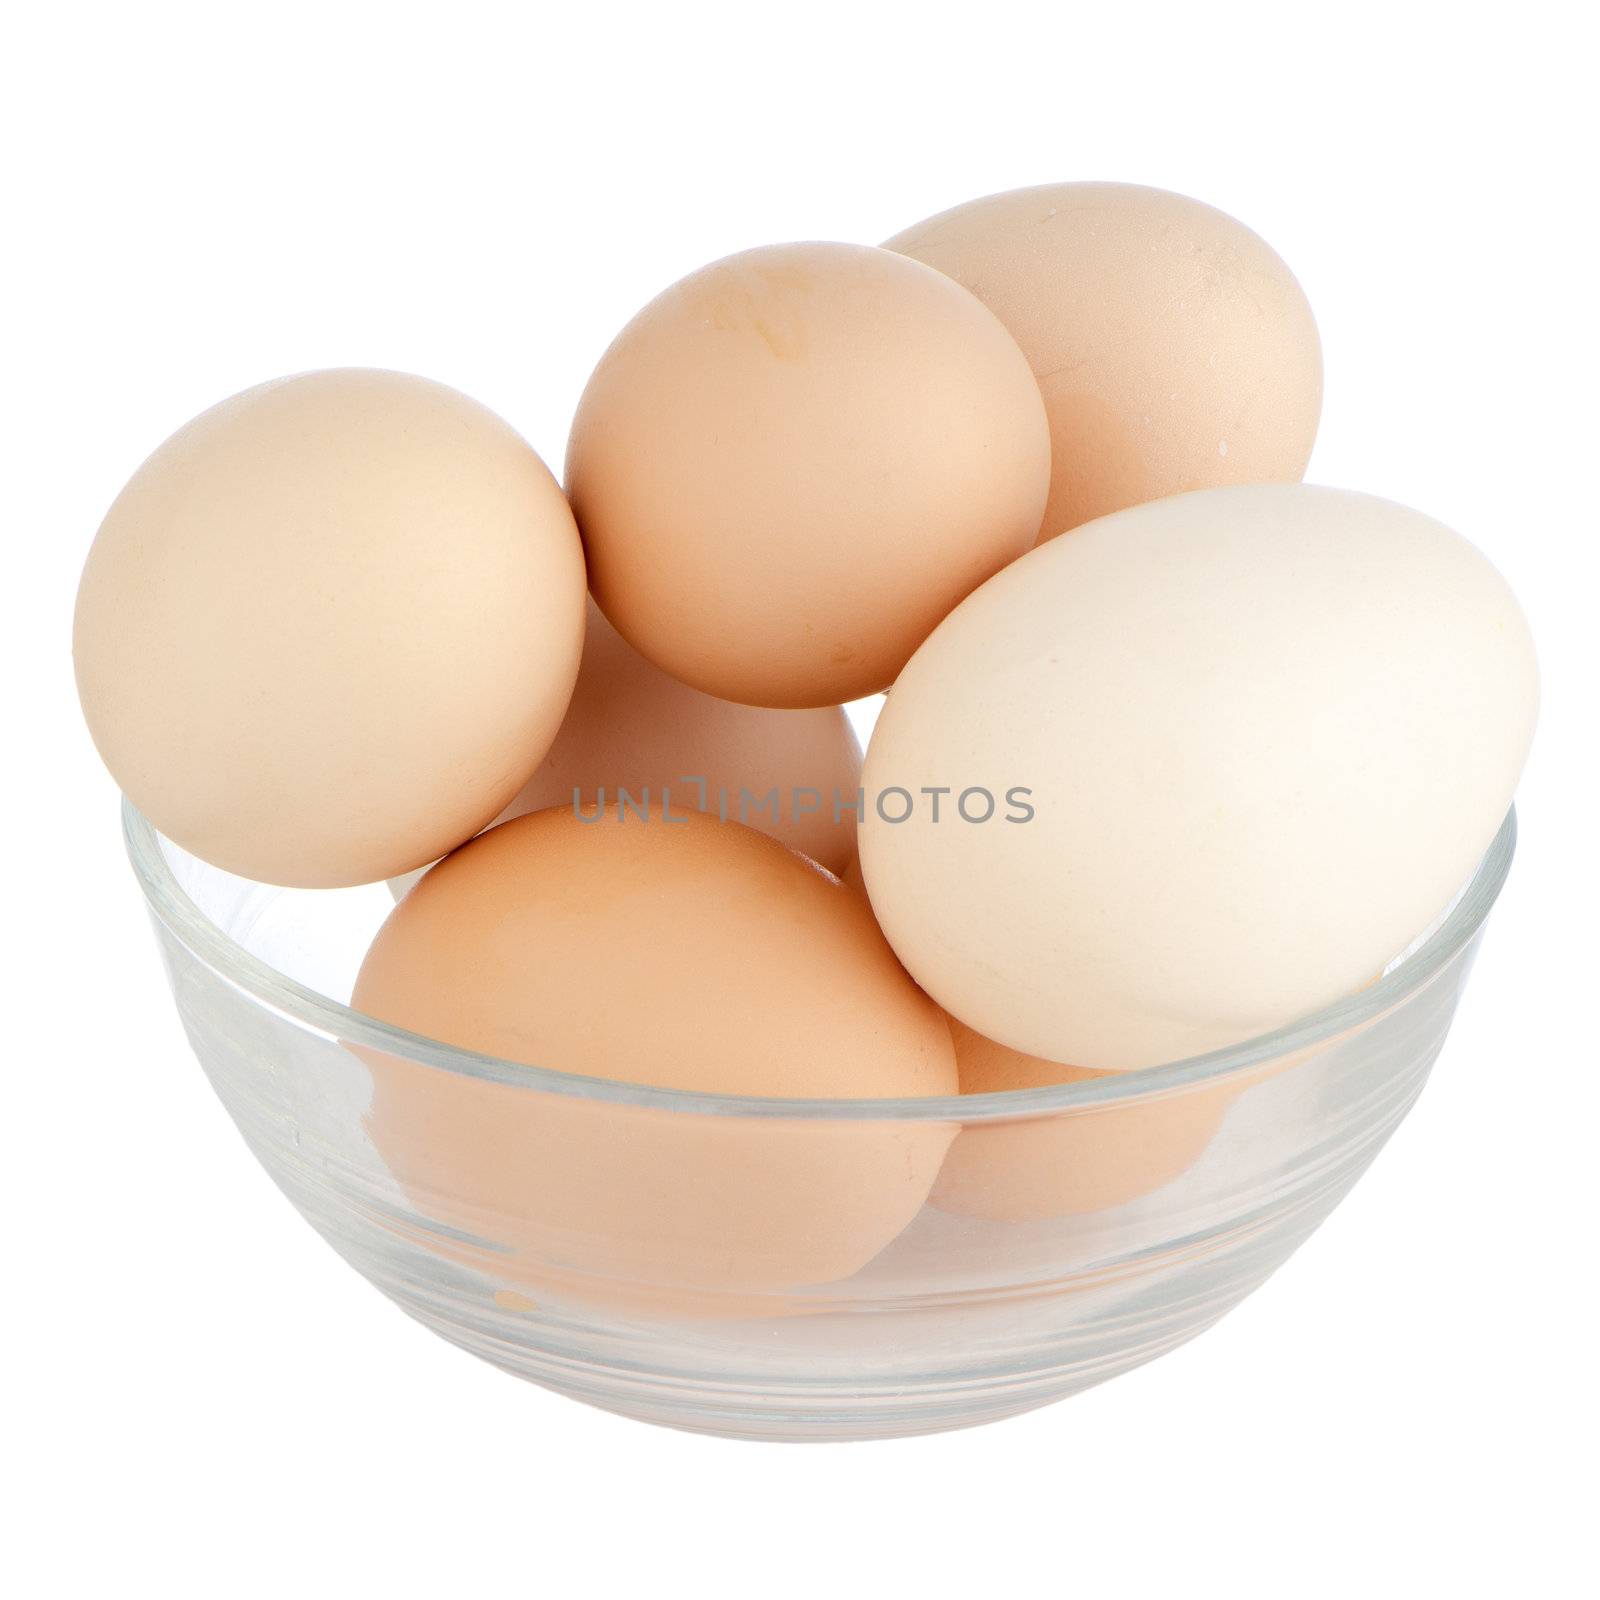 Eggs in glass bowl isolated on the white background.